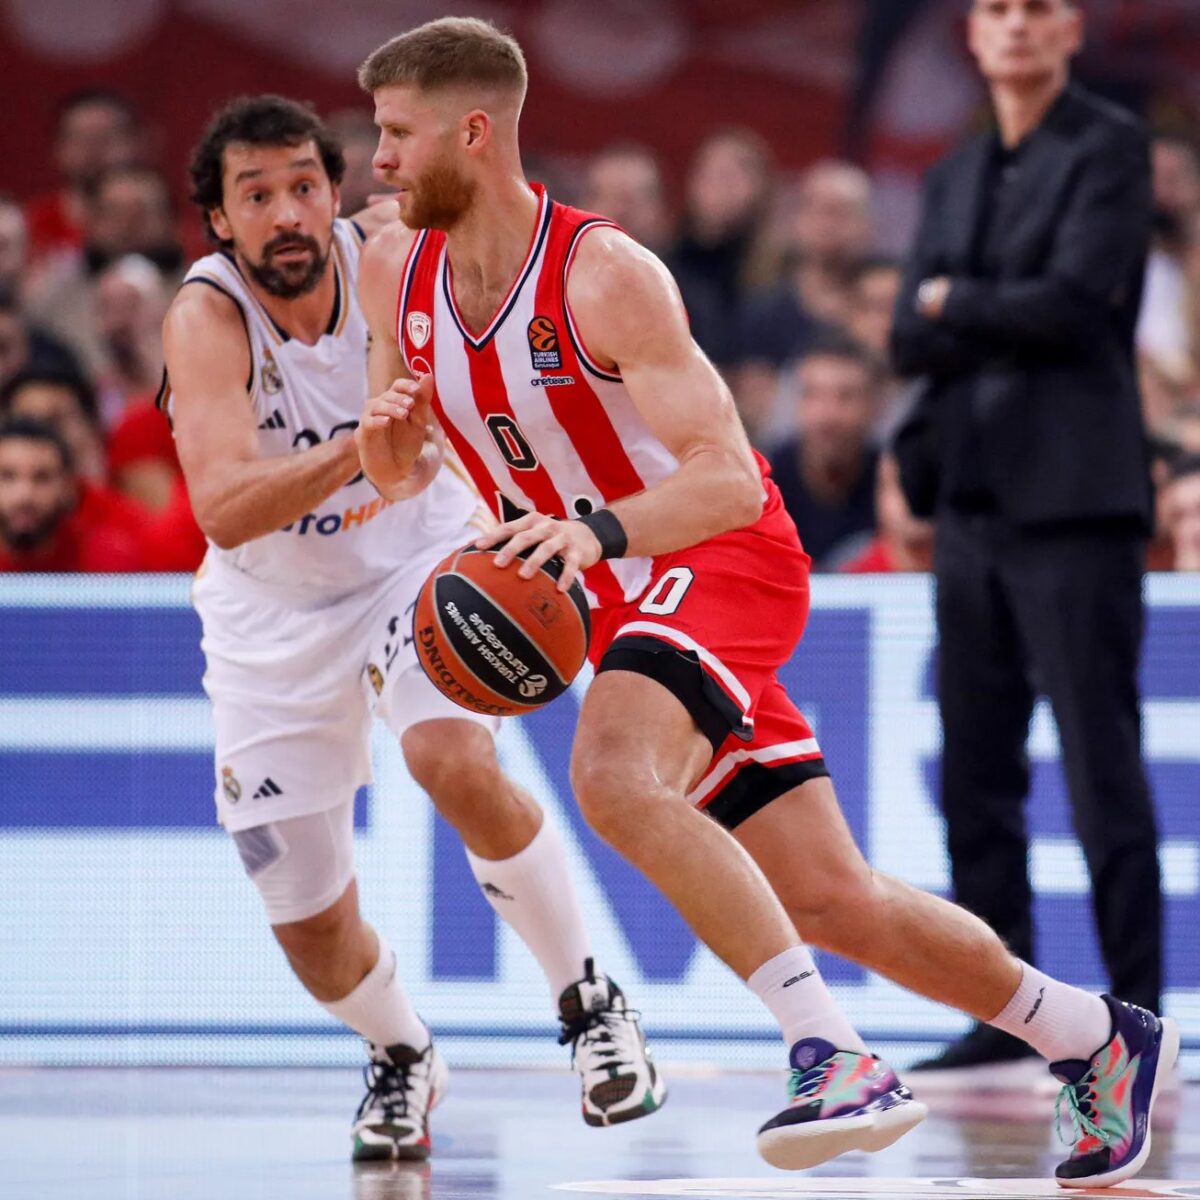 Real Madrid and Olympiacos are set for battle in Euroleague Basketball on Thursday night